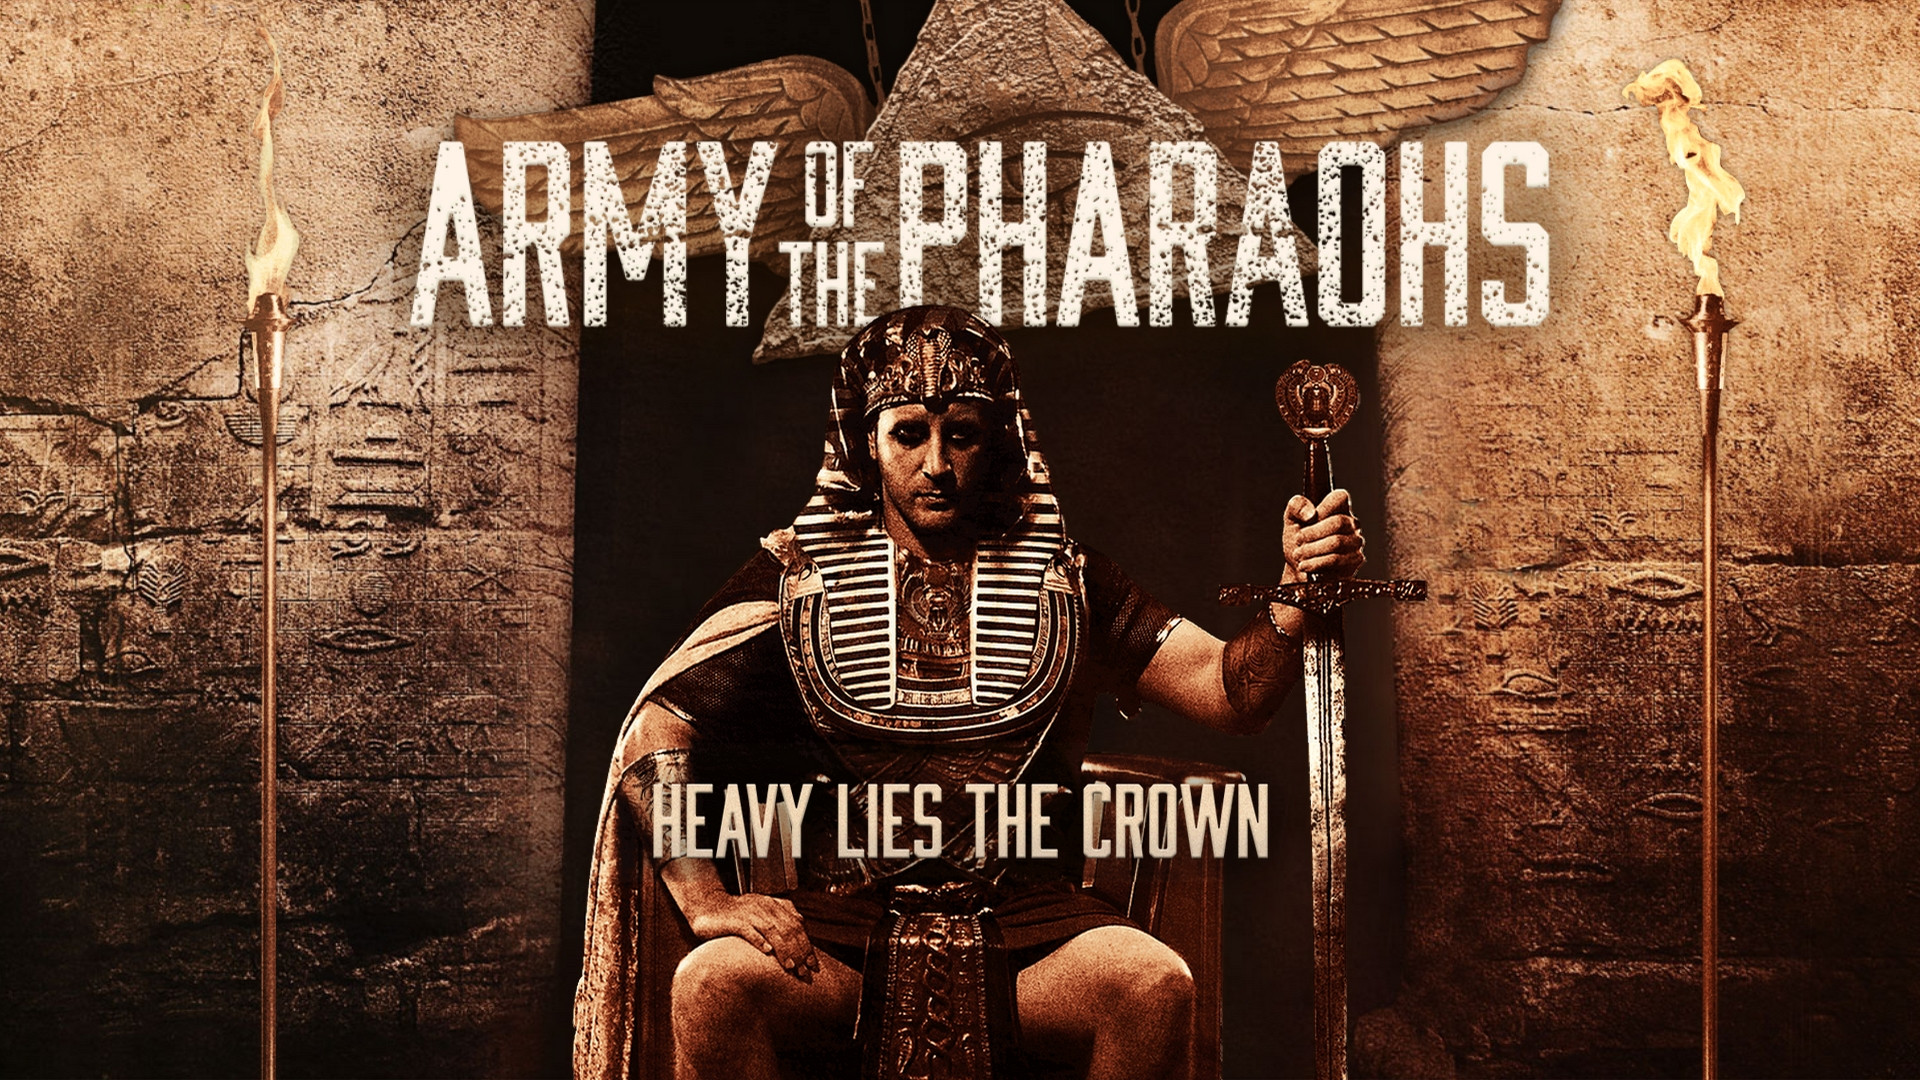 Download Aotp Hd Wallpaper Army Of The Pharaohs On Itl.cat